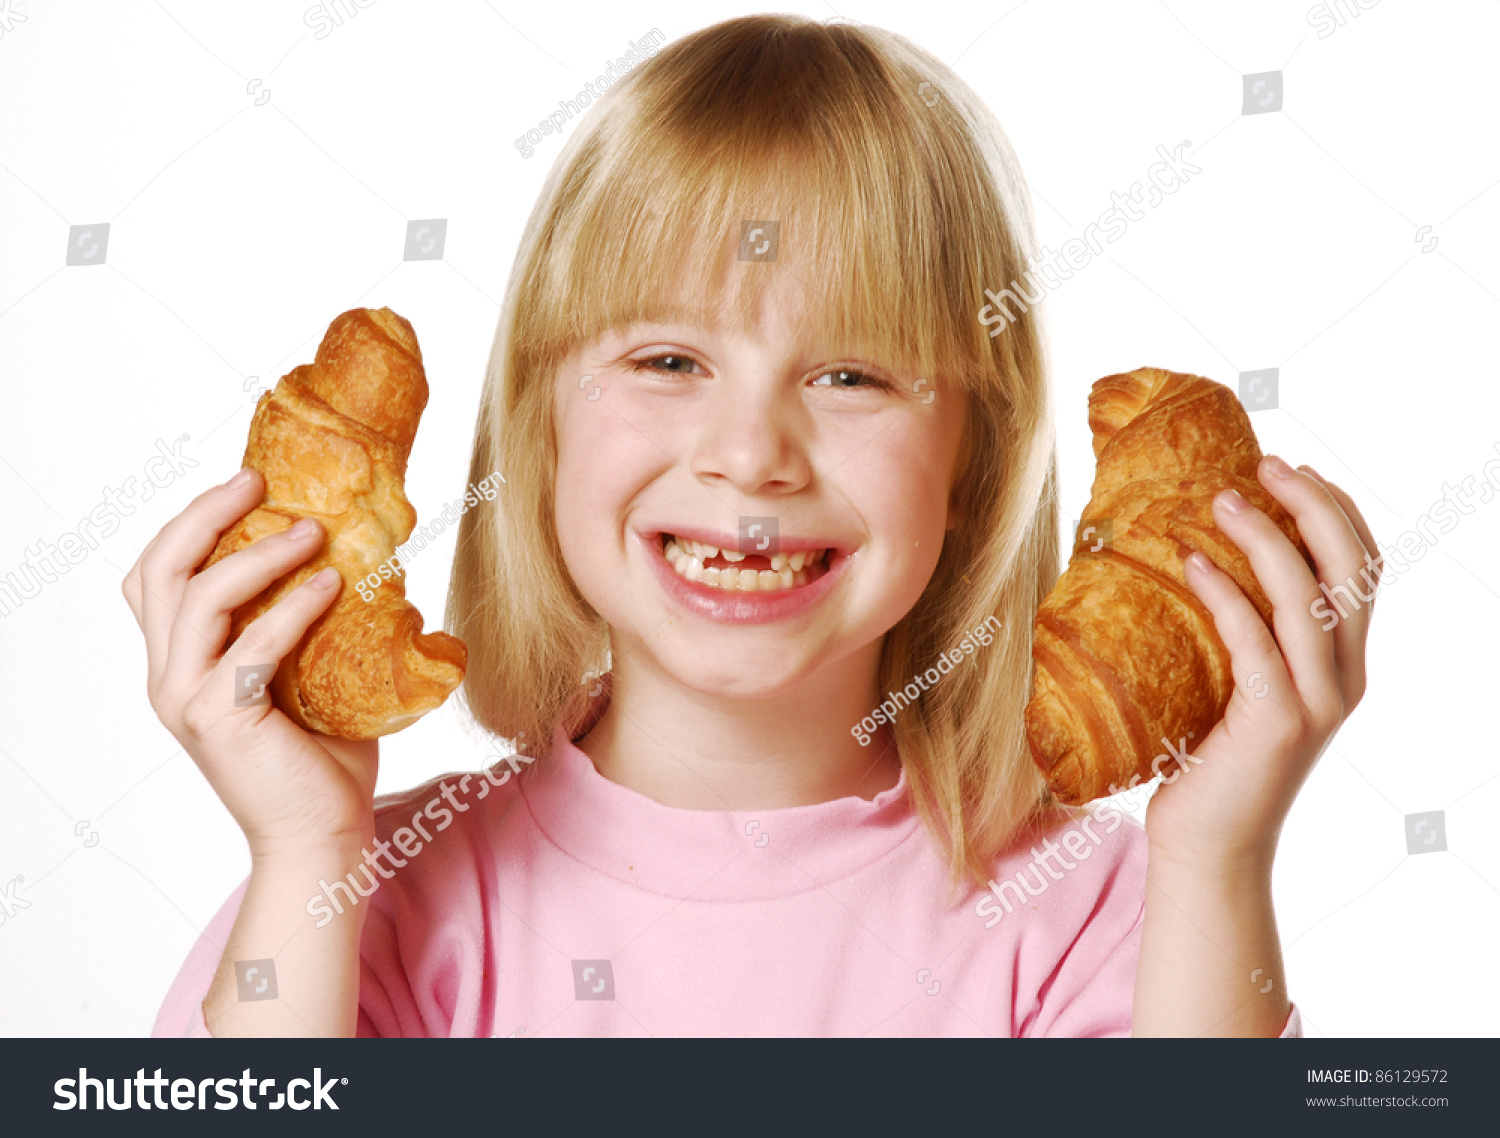 stock-photo-little-girl-holding-and-eati